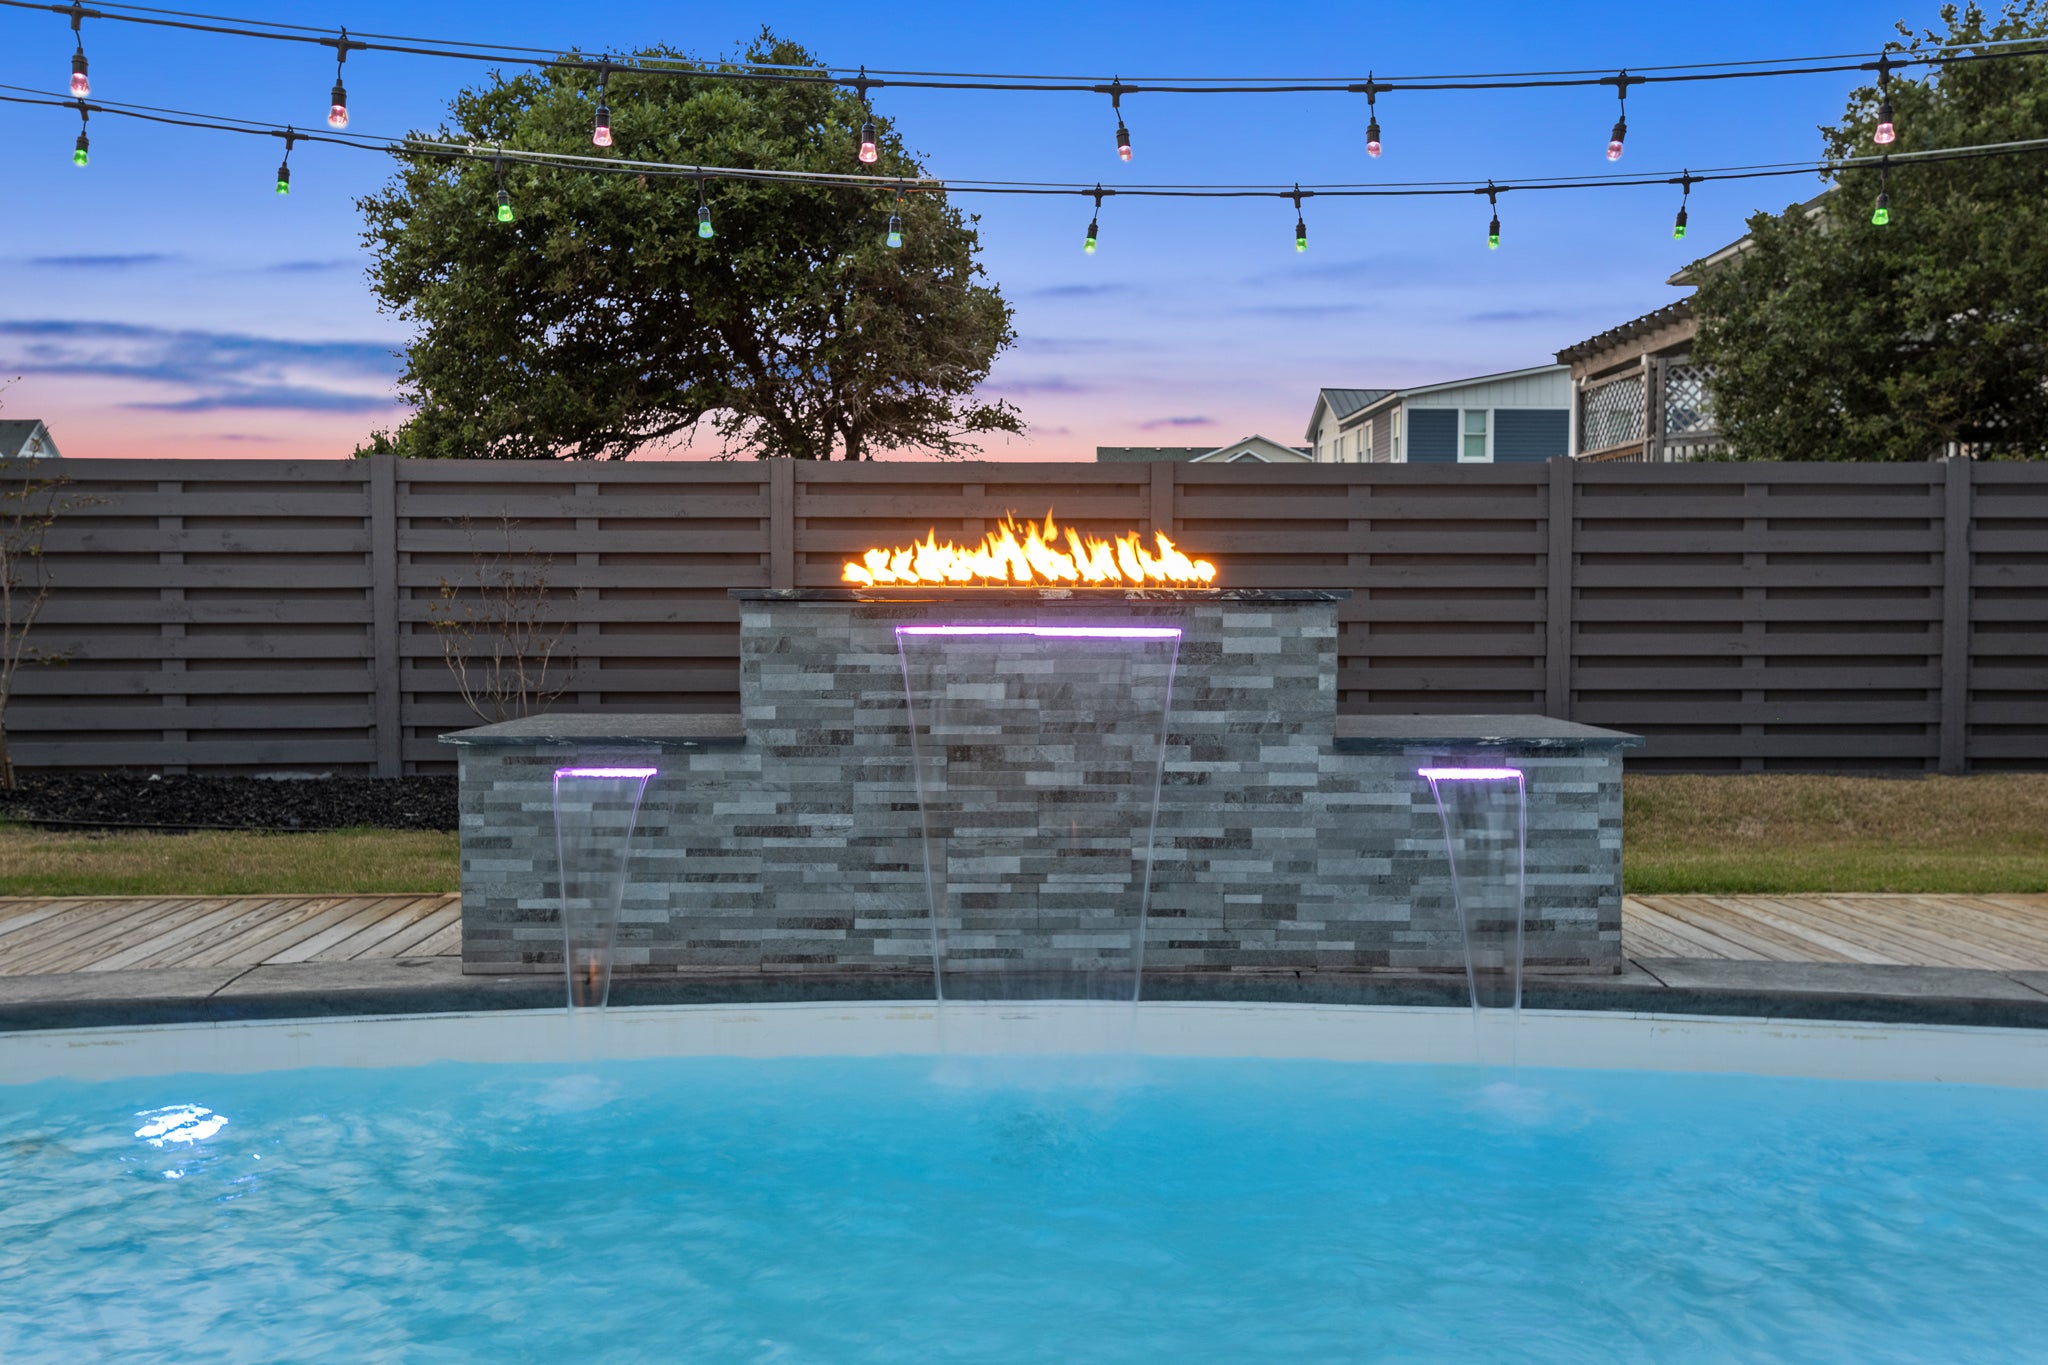 WH786: The OBX One | Private Pool Area